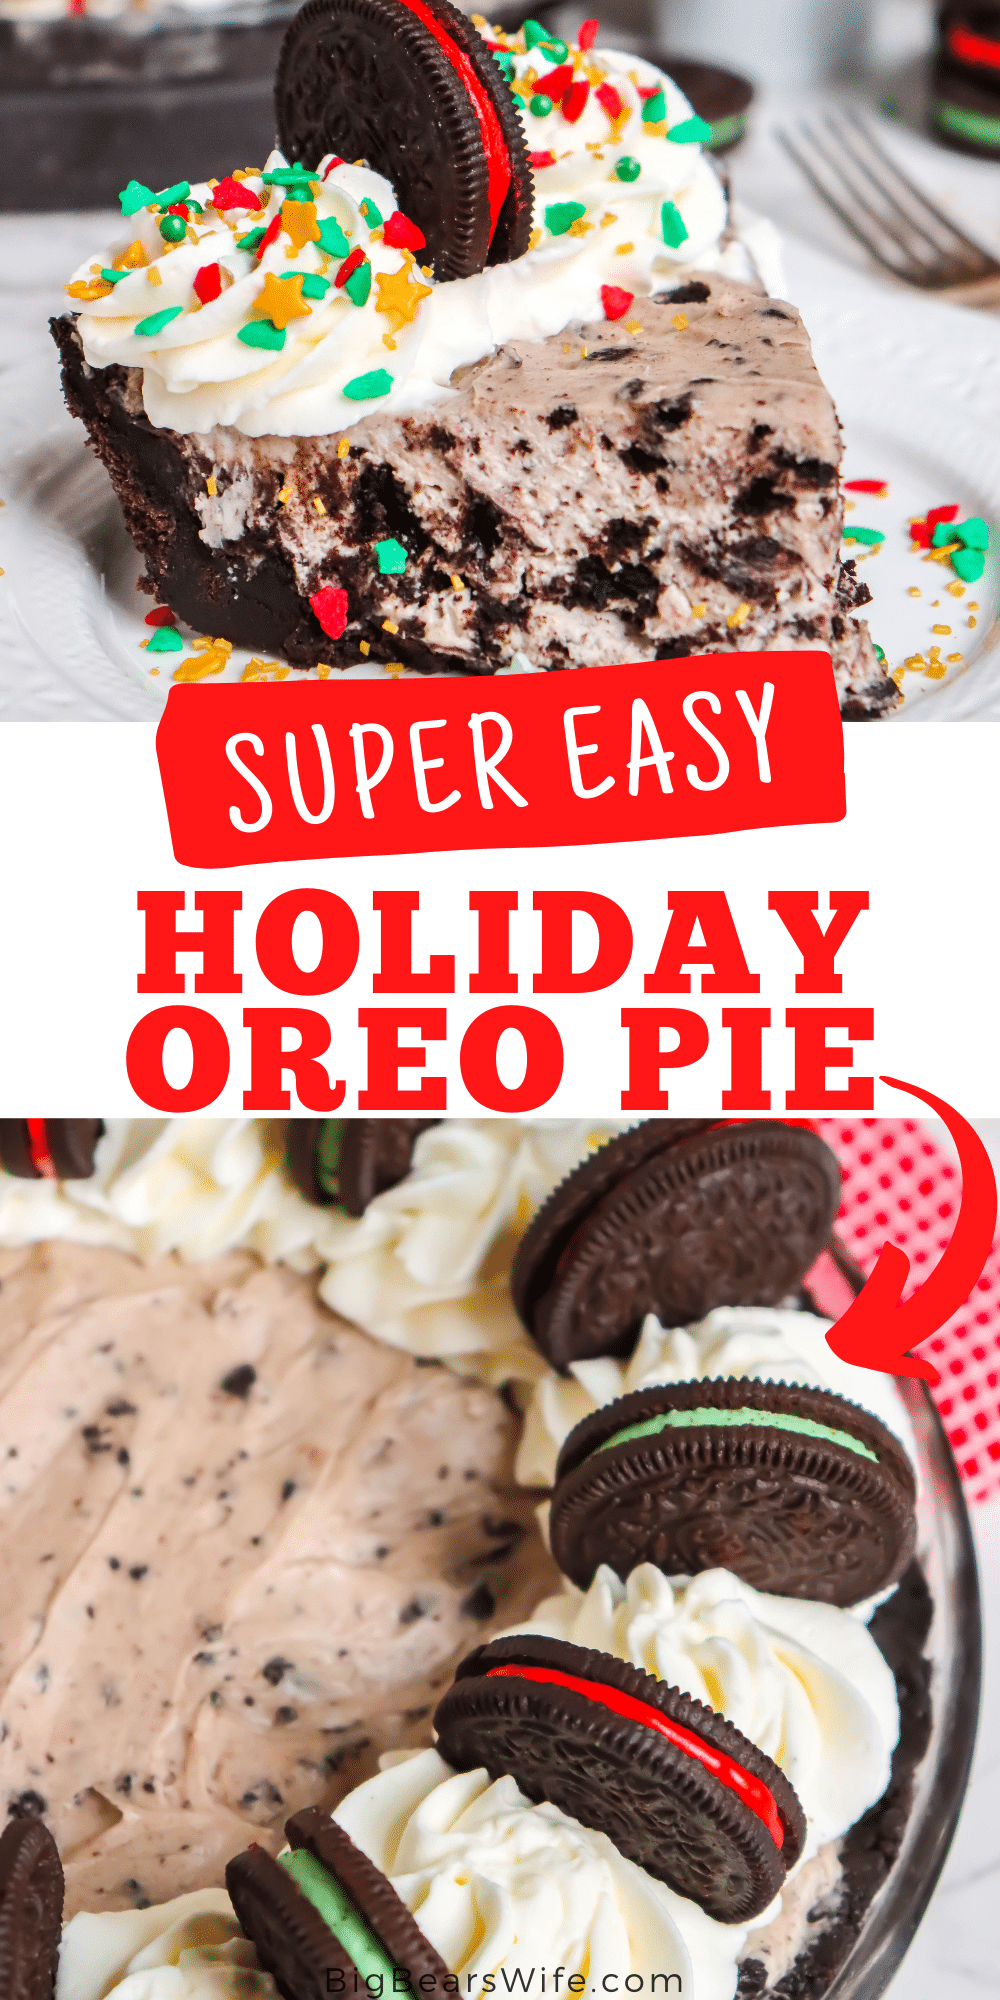 Ready to make a super easy holiday dessert recipe? This Holiday Oreo Pie is a cheesecake pie filled with crushed OREO cookies and topped with Holiday red and green OREO cookies and holiday sprinkles.  via @bigbearswife